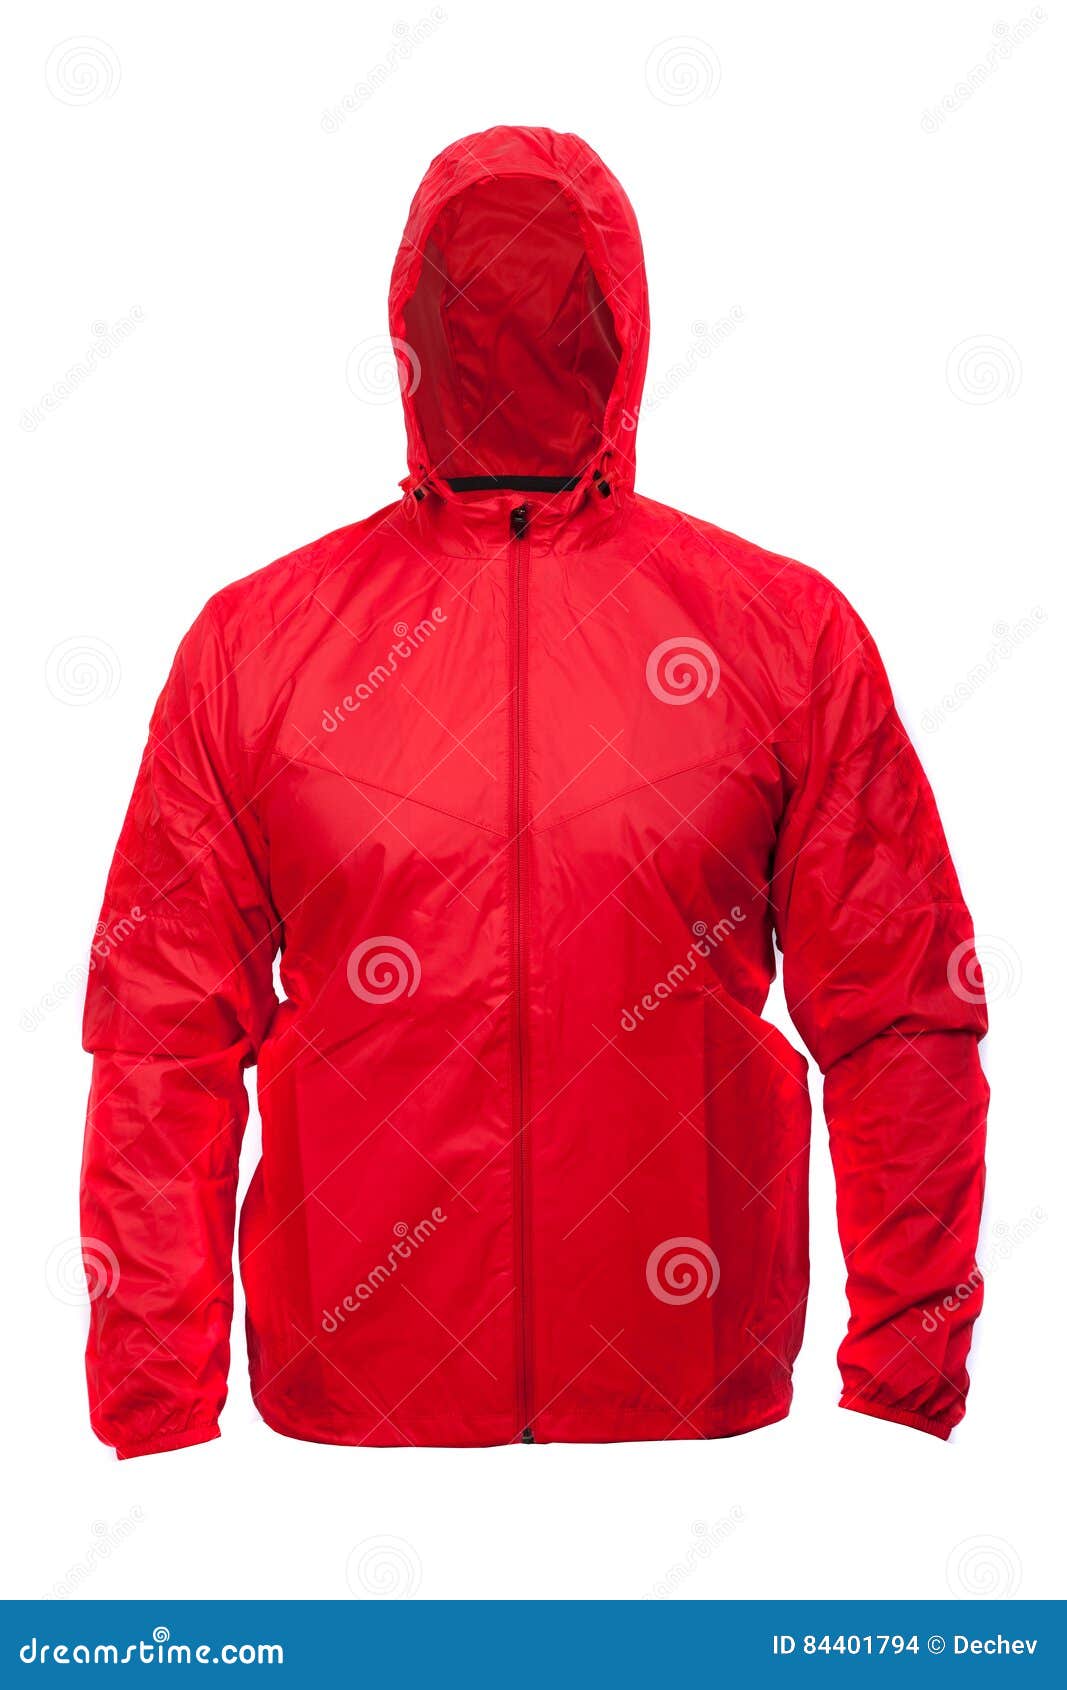 red windbreaker sports jacket with hood,  on white